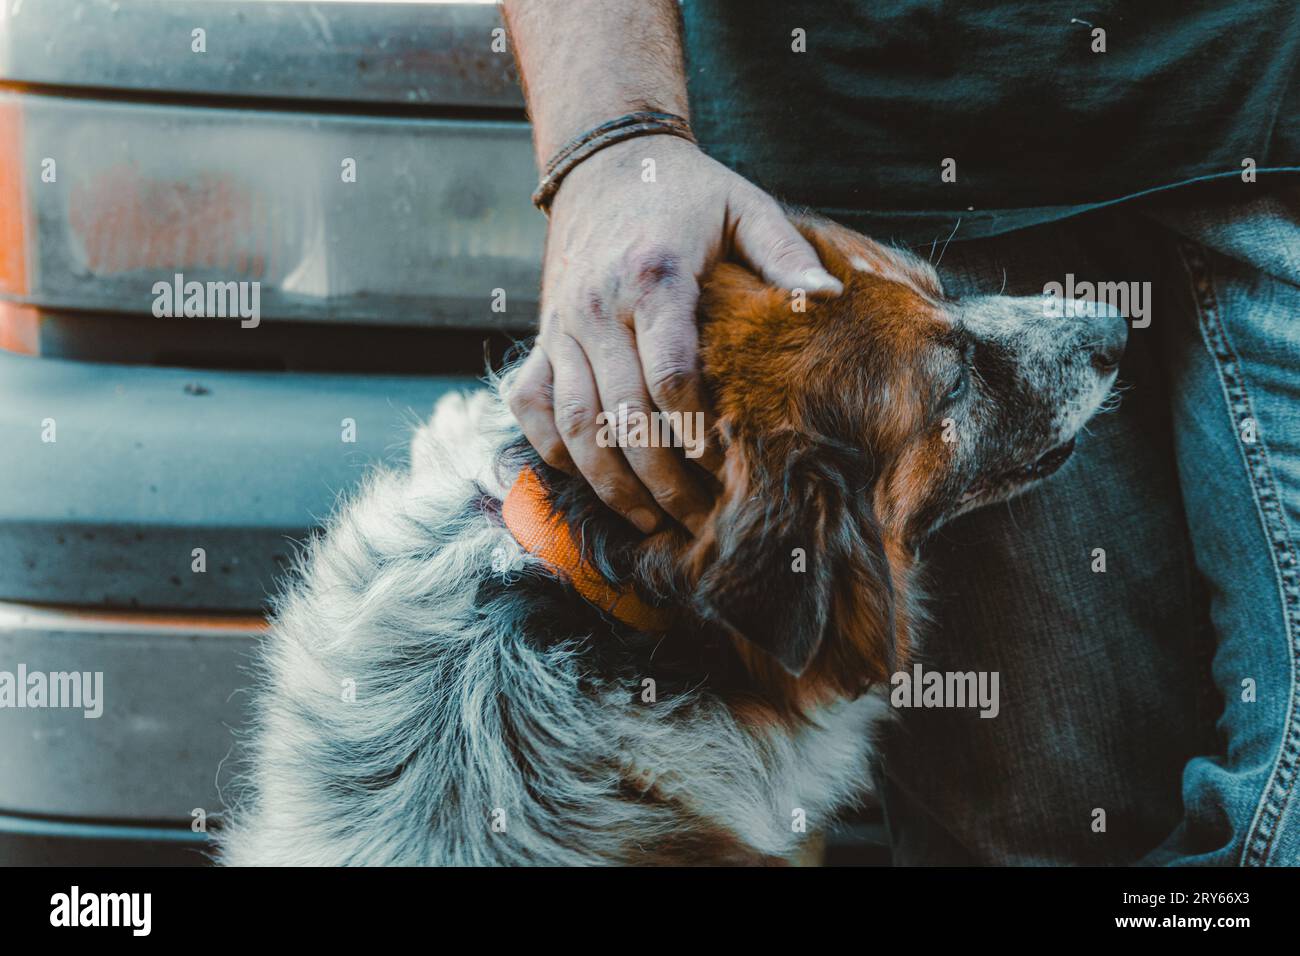 Mechanic Man Petting Dog While Leaning on Work Truck Stock Photo